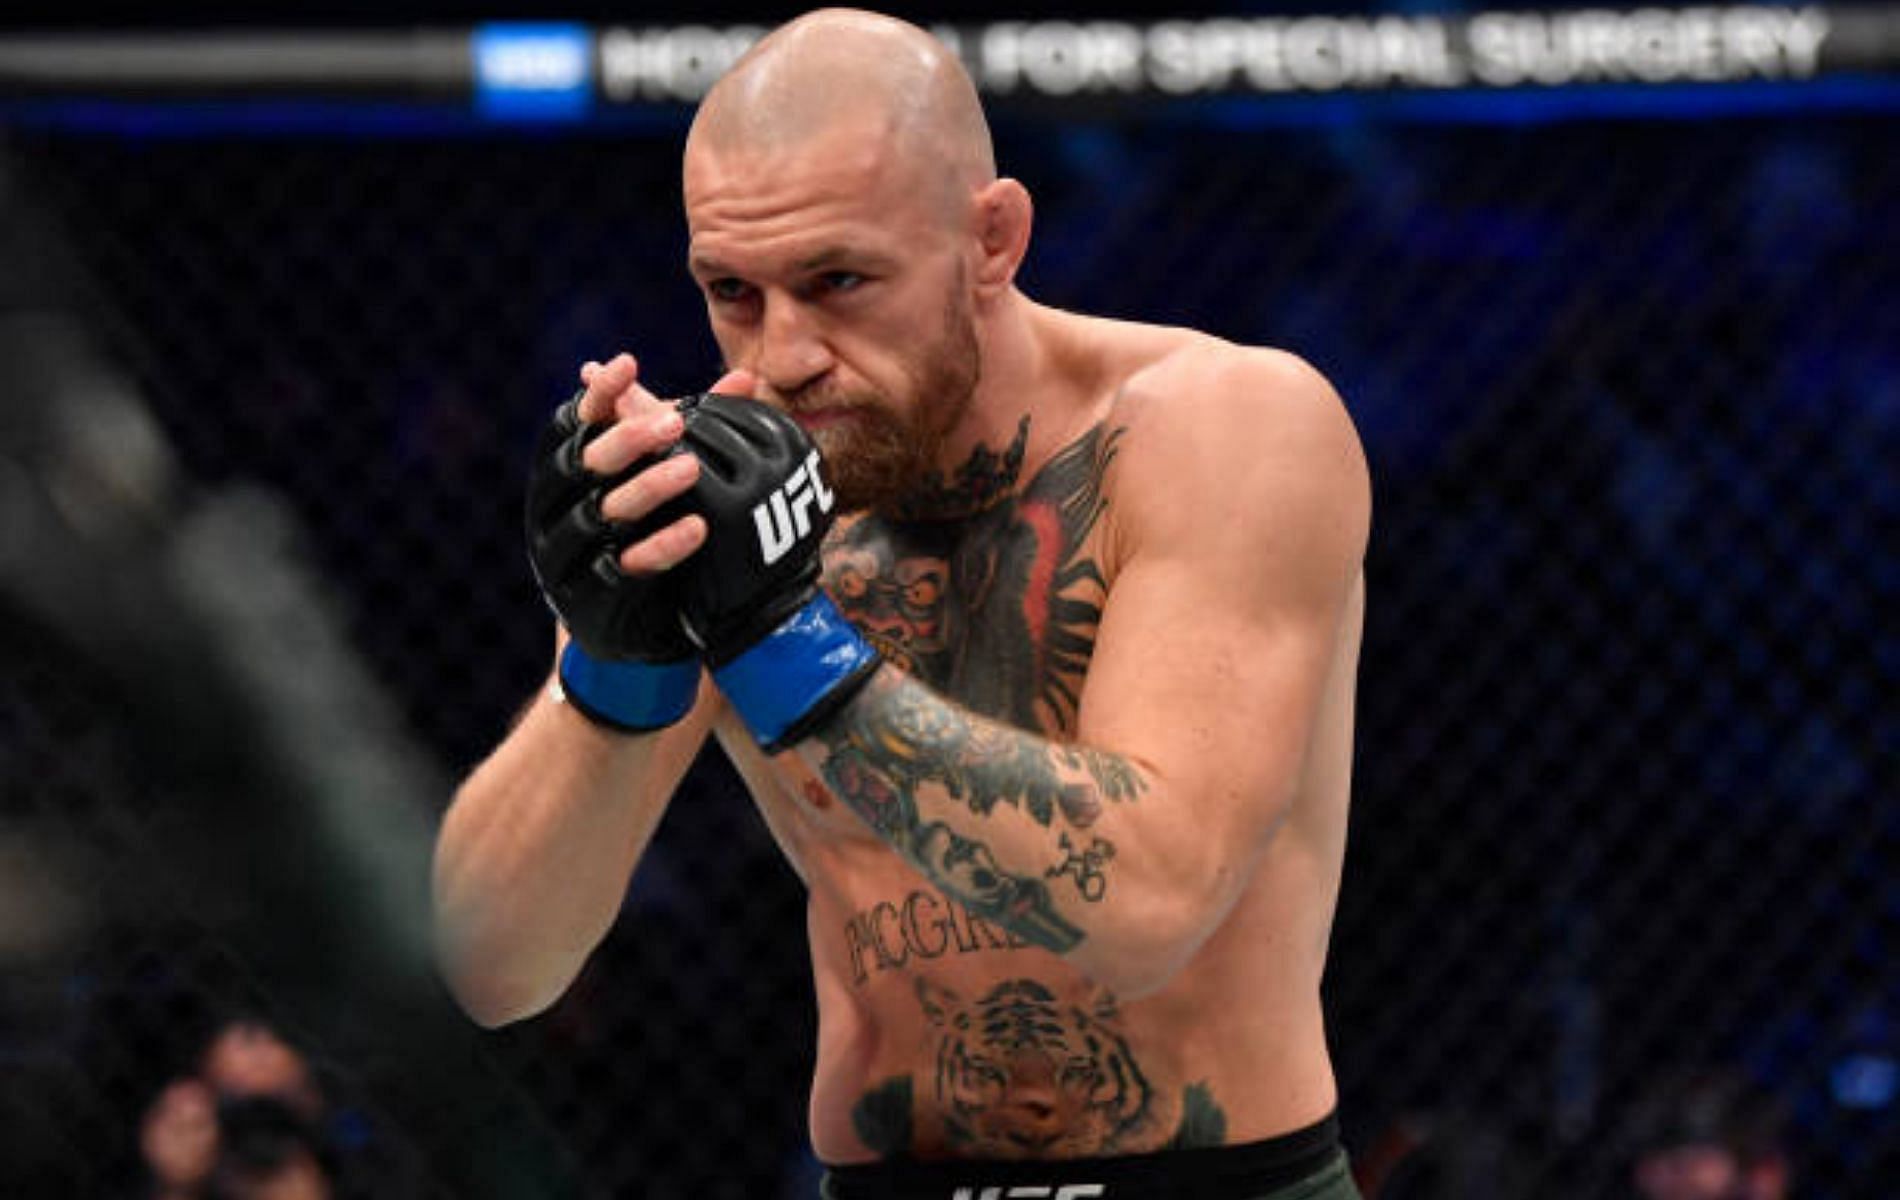 Does Conor McGregor have it in him to become a UFC champion again?